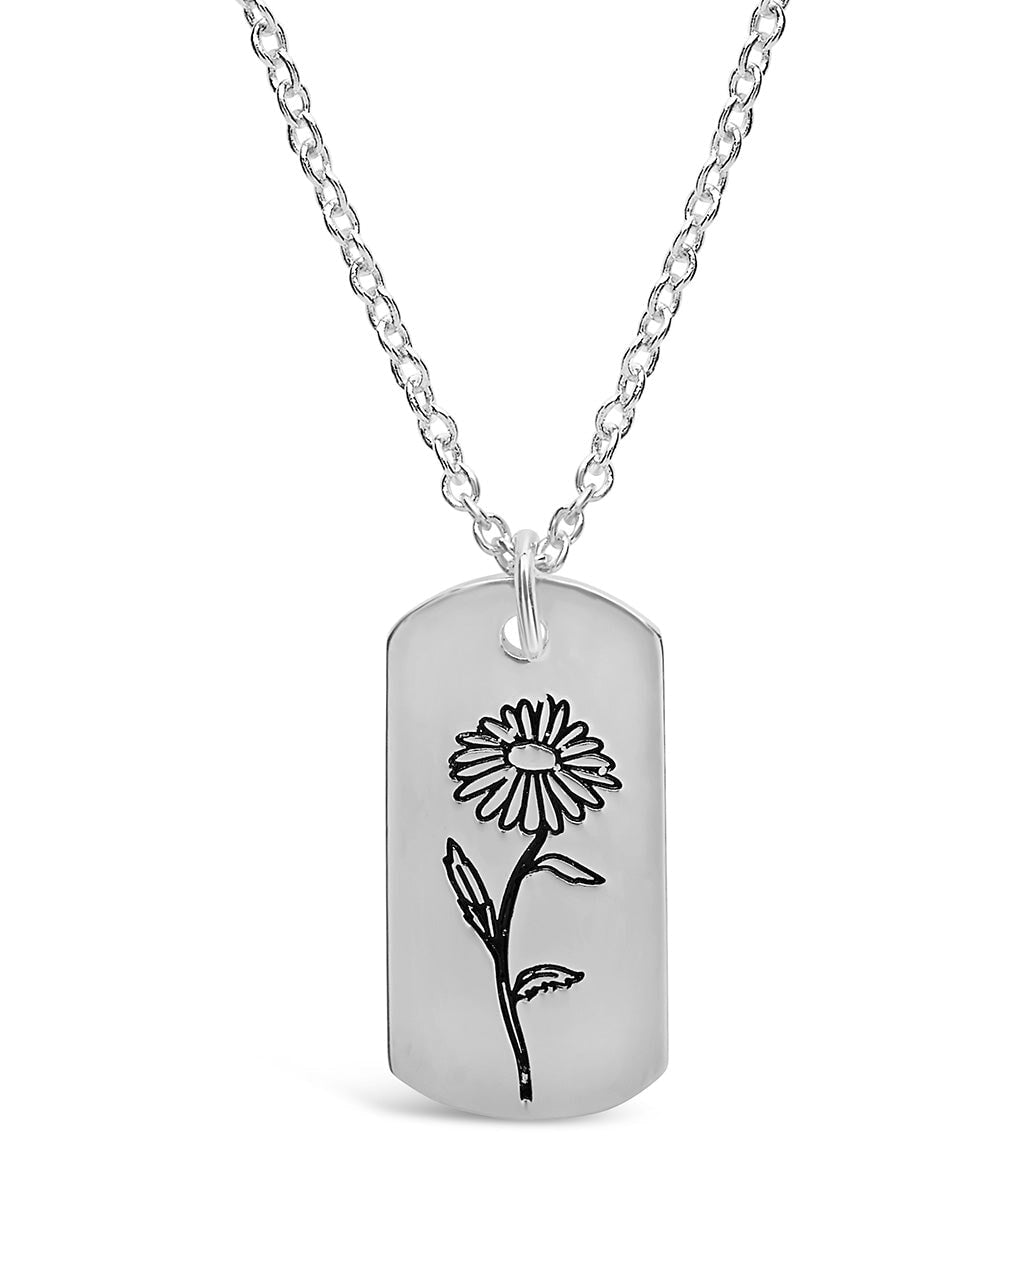 Birth Flower Pendant Necklace Sterling Forever Silver April / Daisy 